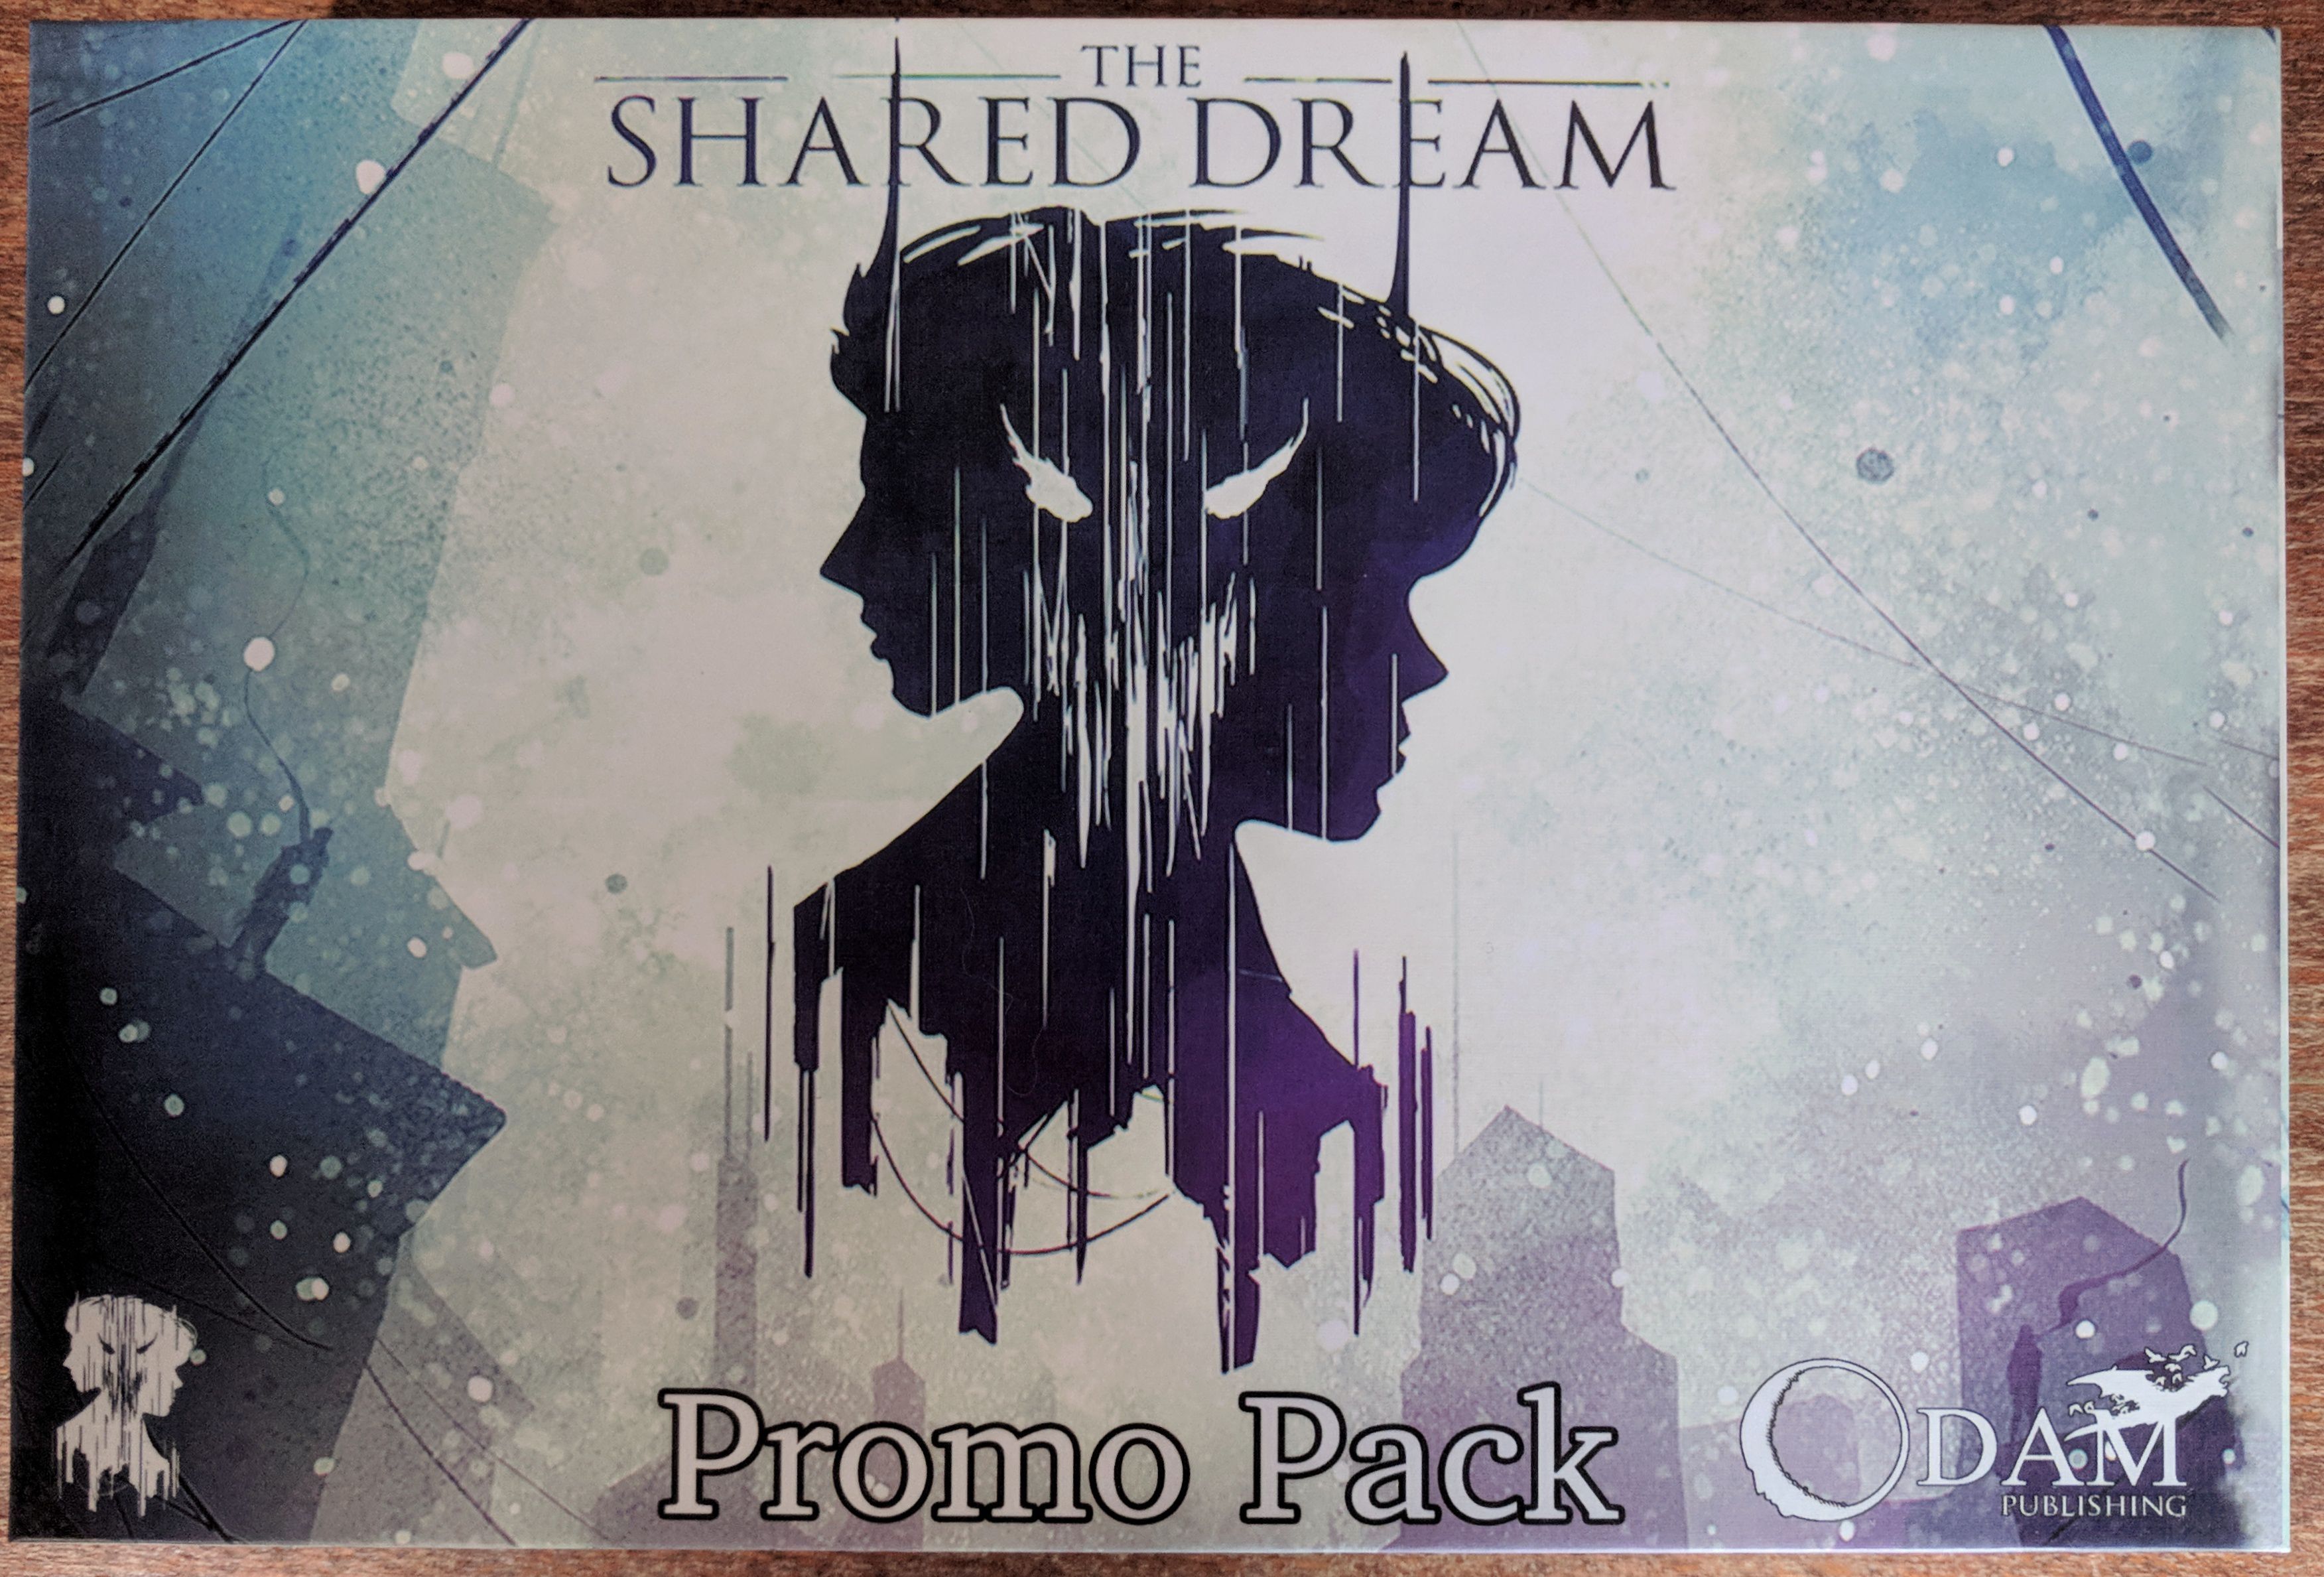 Sharing dreams. Promo Pack. The Promo Pack 4. Philip / Dream of me.